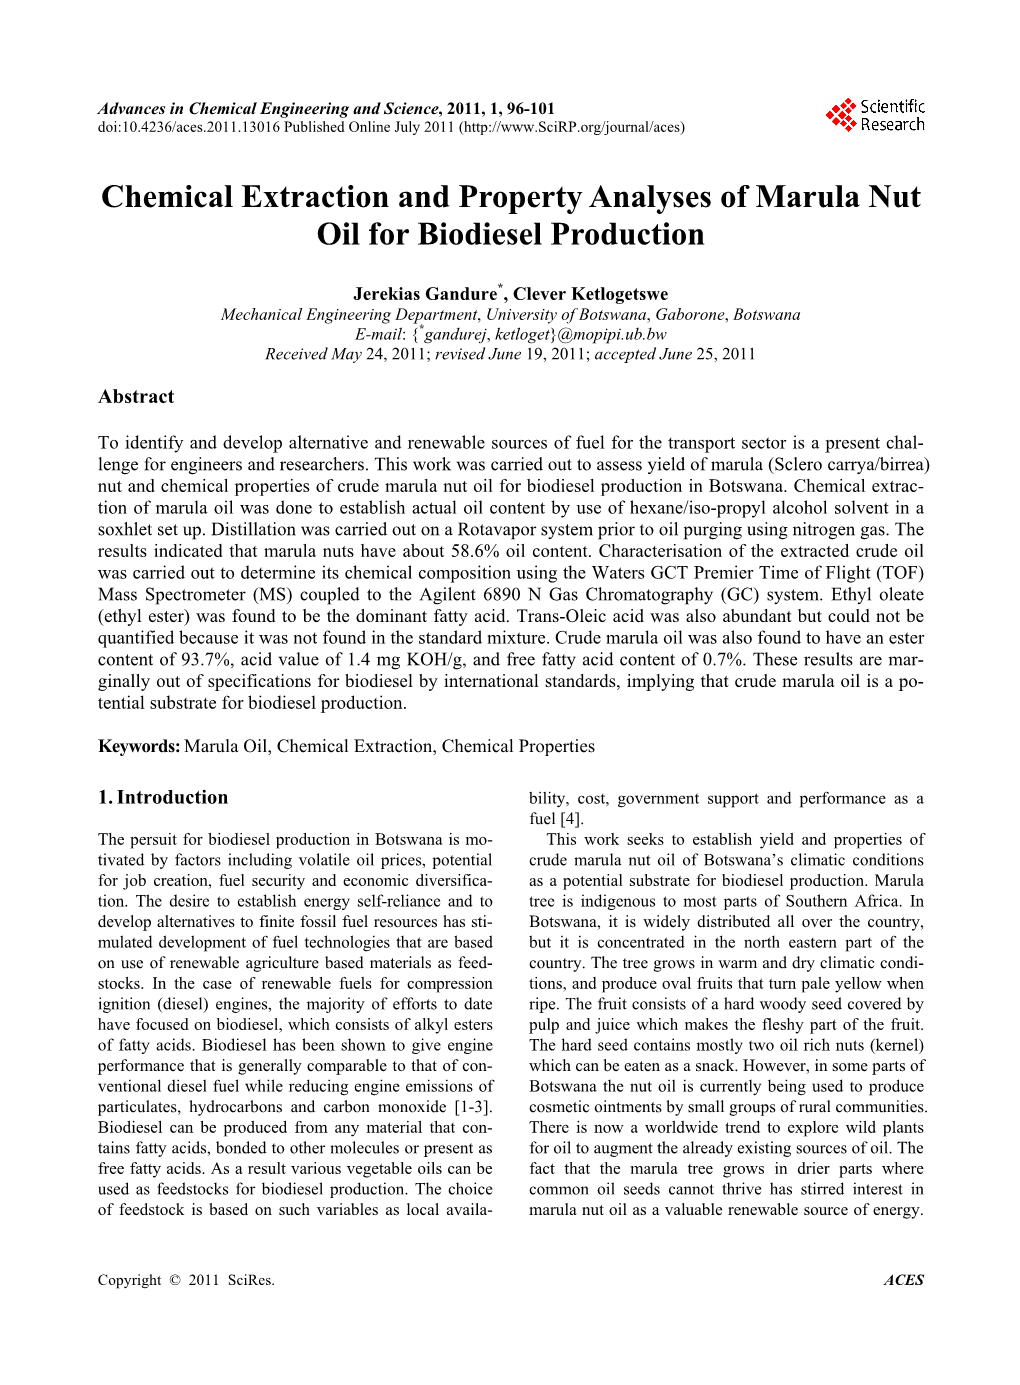 Chemical Extraction and Property Analyses of Marula Nut Oil for Biodiesel Production